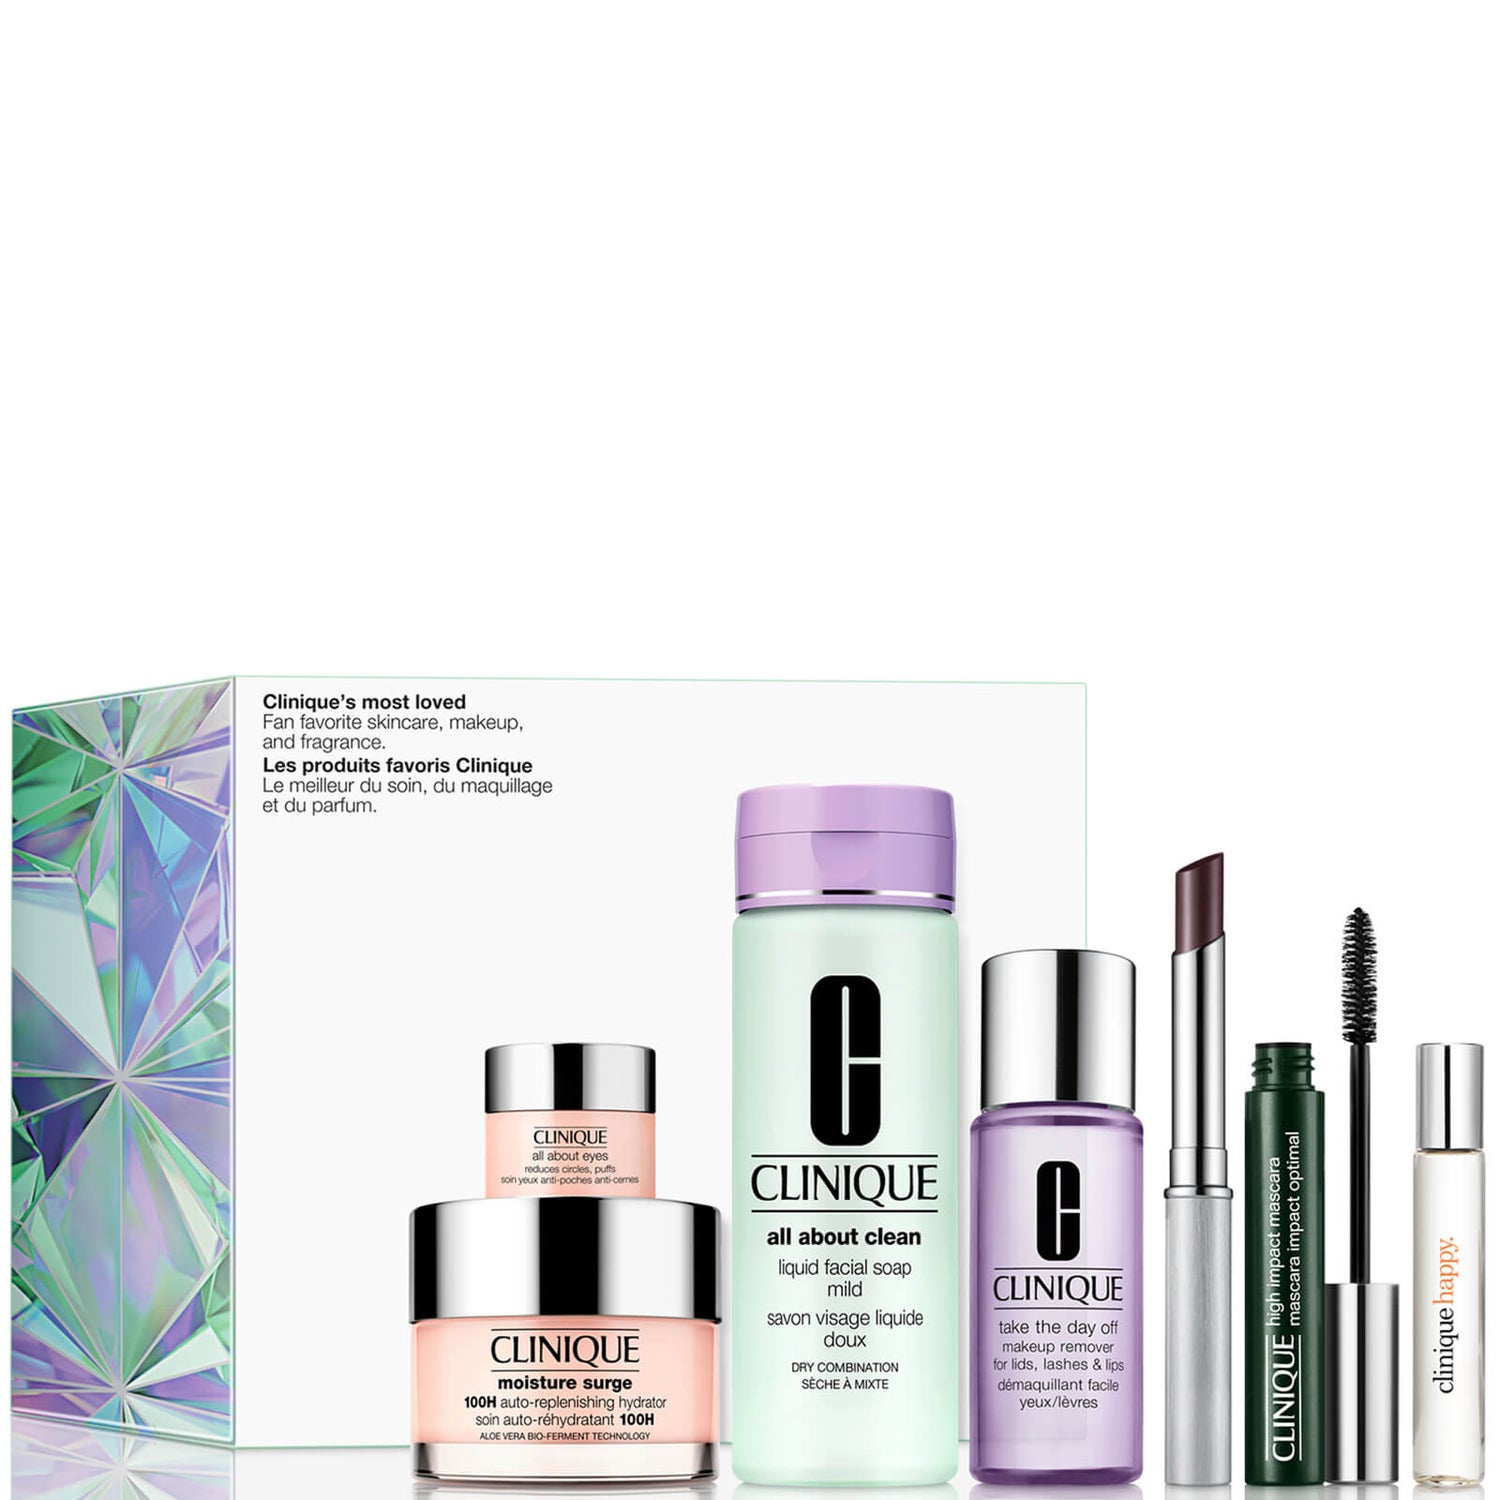 Clinique Clinique's Most Loved: 7-Piece Beauty Gift Set (Worth £137.40)